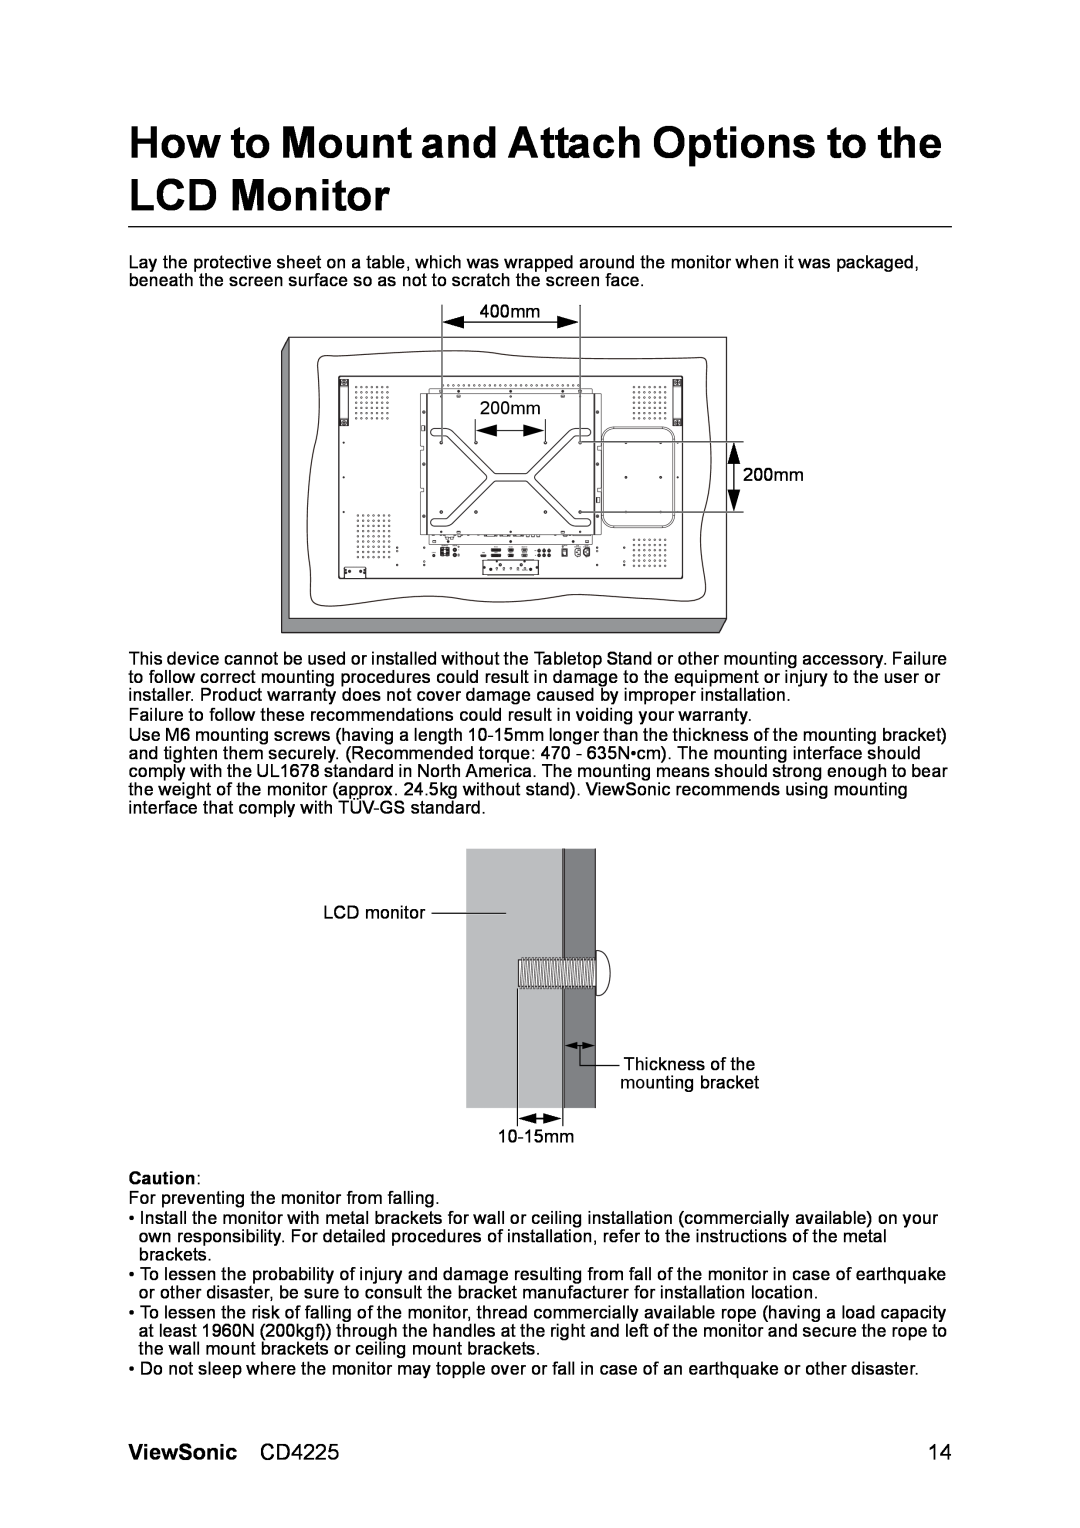 ViewSonic manual How to Mount and Attach Options to the LCD Monitor, ViewSonic CD4225 